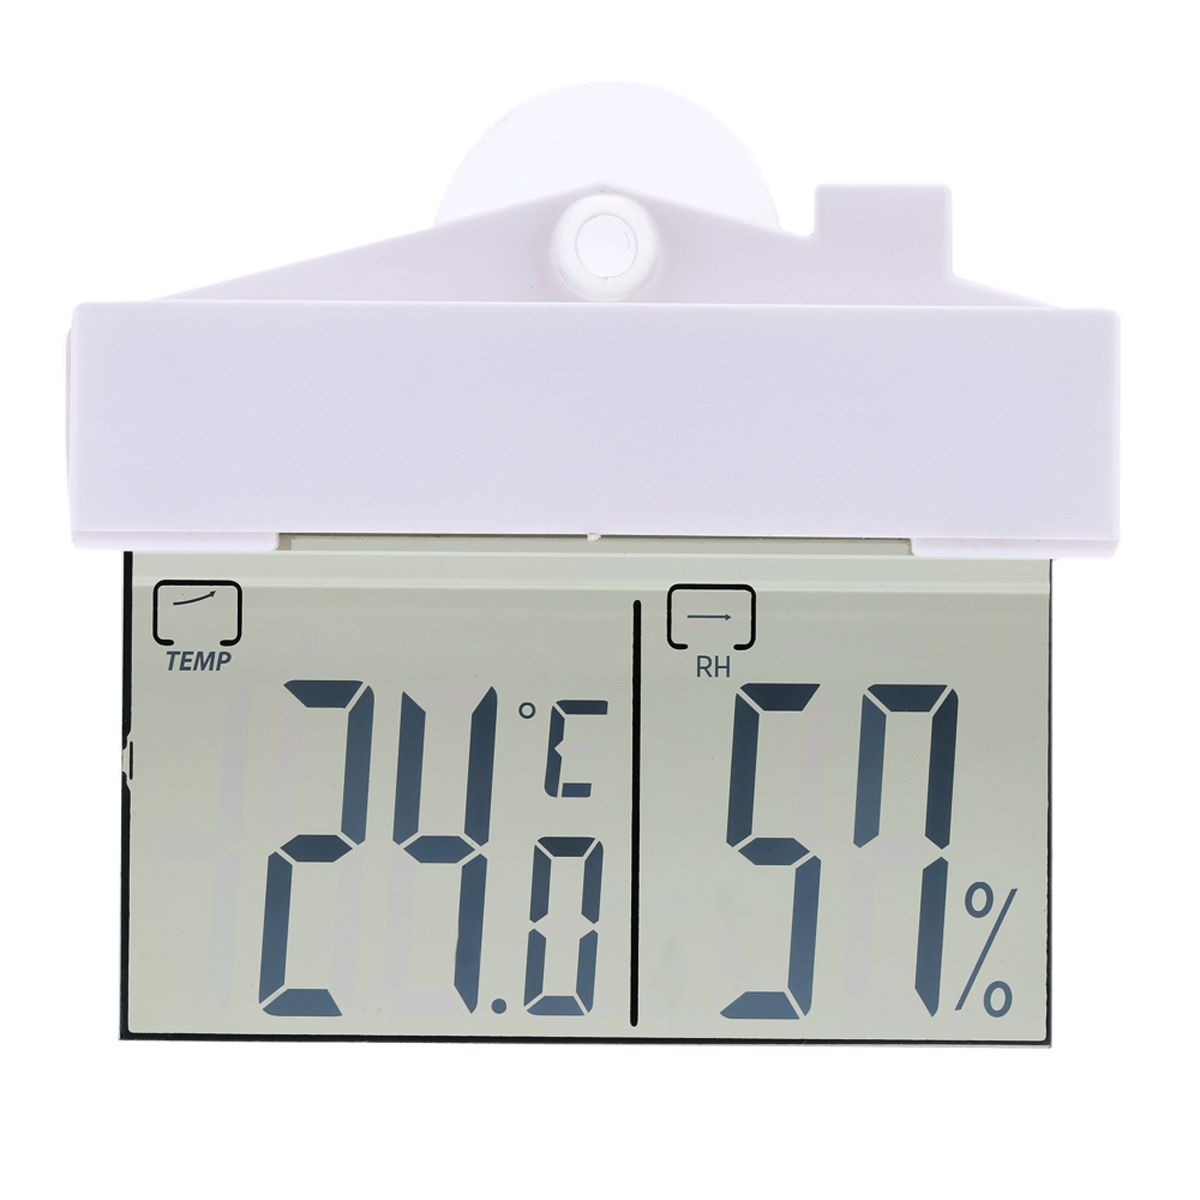 TS---H220-Mini-LCD-Display-Digital-Thermometer-For-indoor-Outdoor-Use-Sucker-Wall-Hanging-Temperatur-1455630